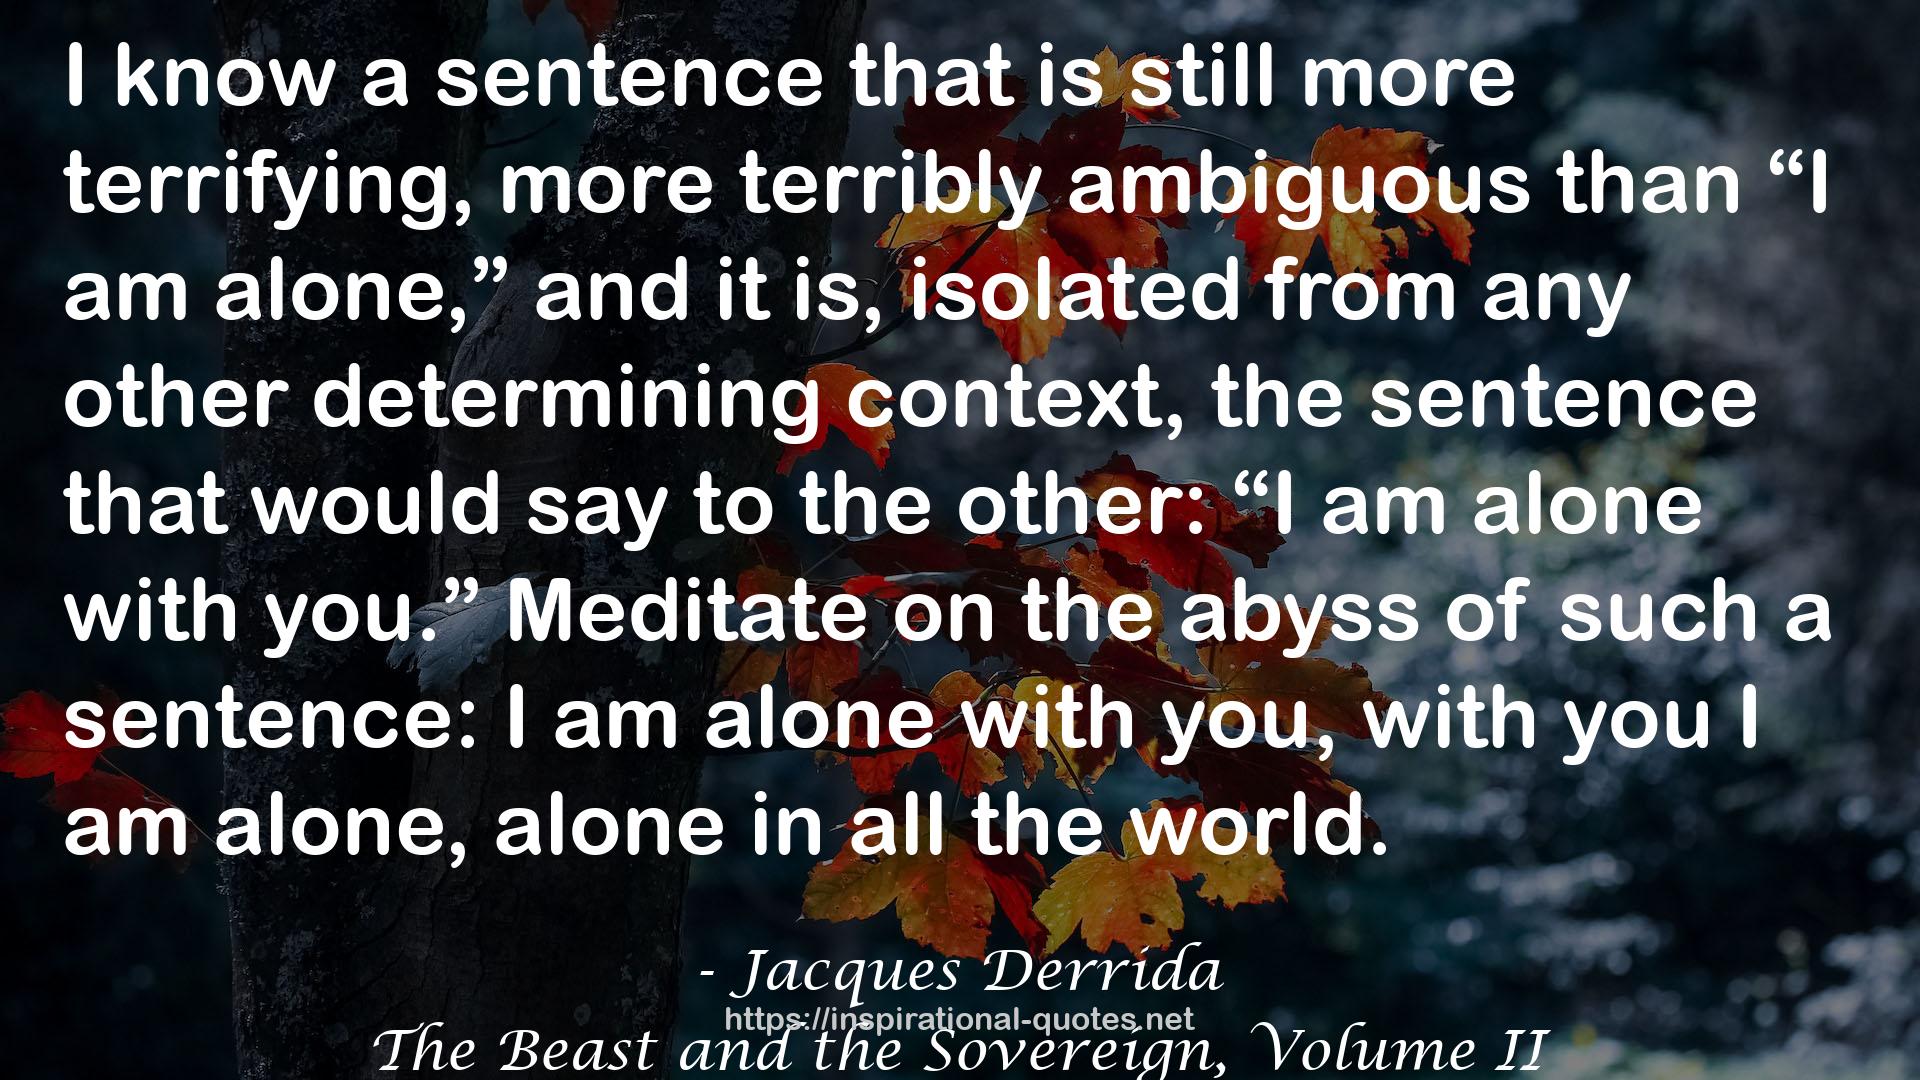 The Beast and the Sovereign, Volume II QUOTES